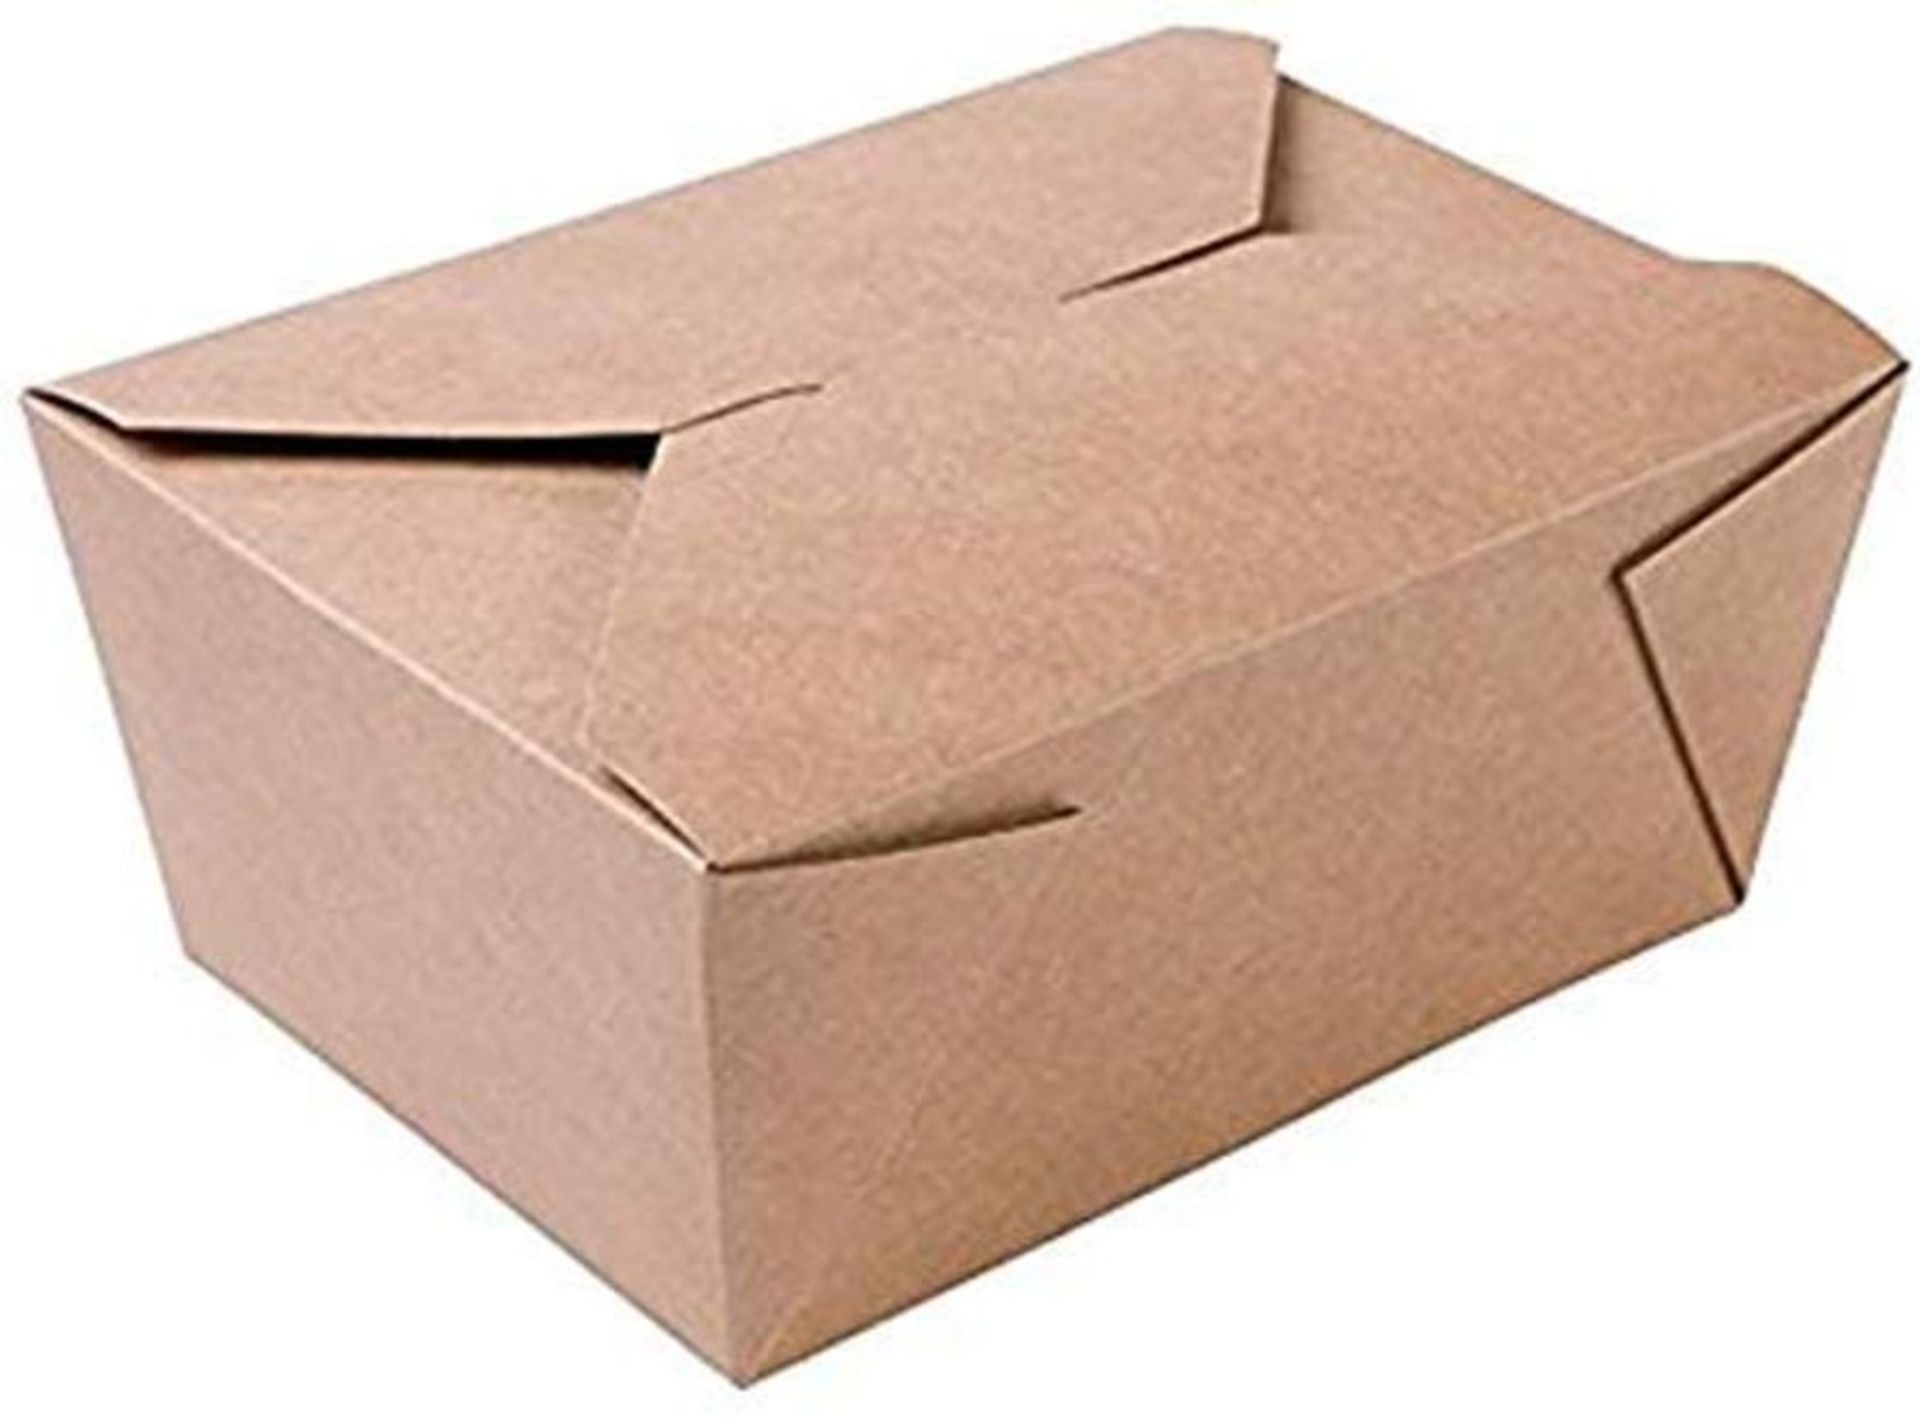 Disposable Kraft Paper Box To Go Containers - 50 Biodegradable Hot and Cold Take Out F